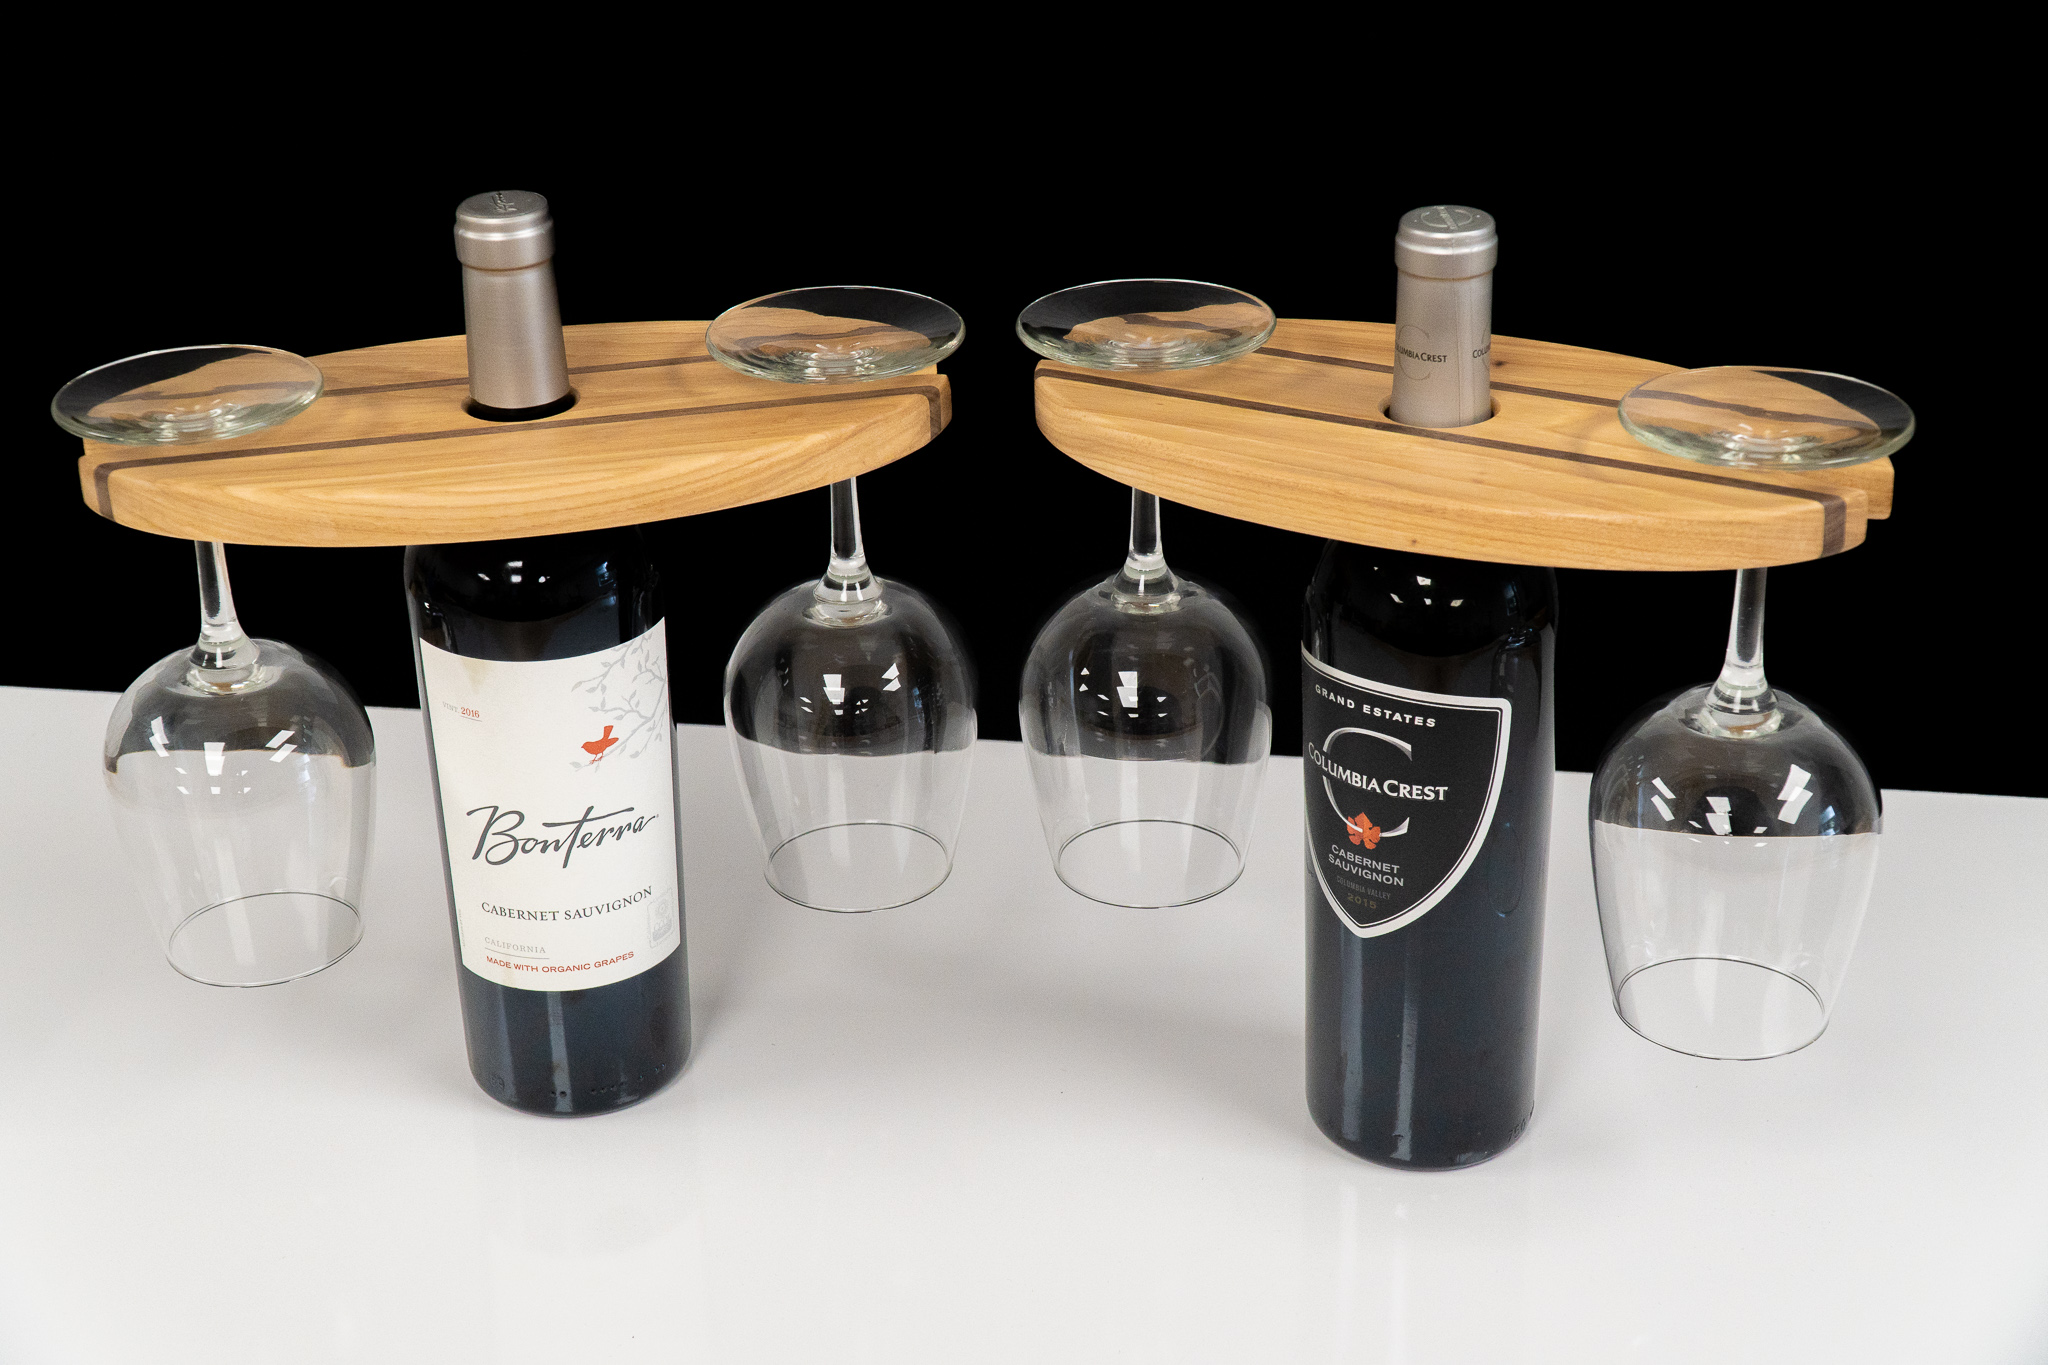 How to Make a Wine Bottle and Glass Display